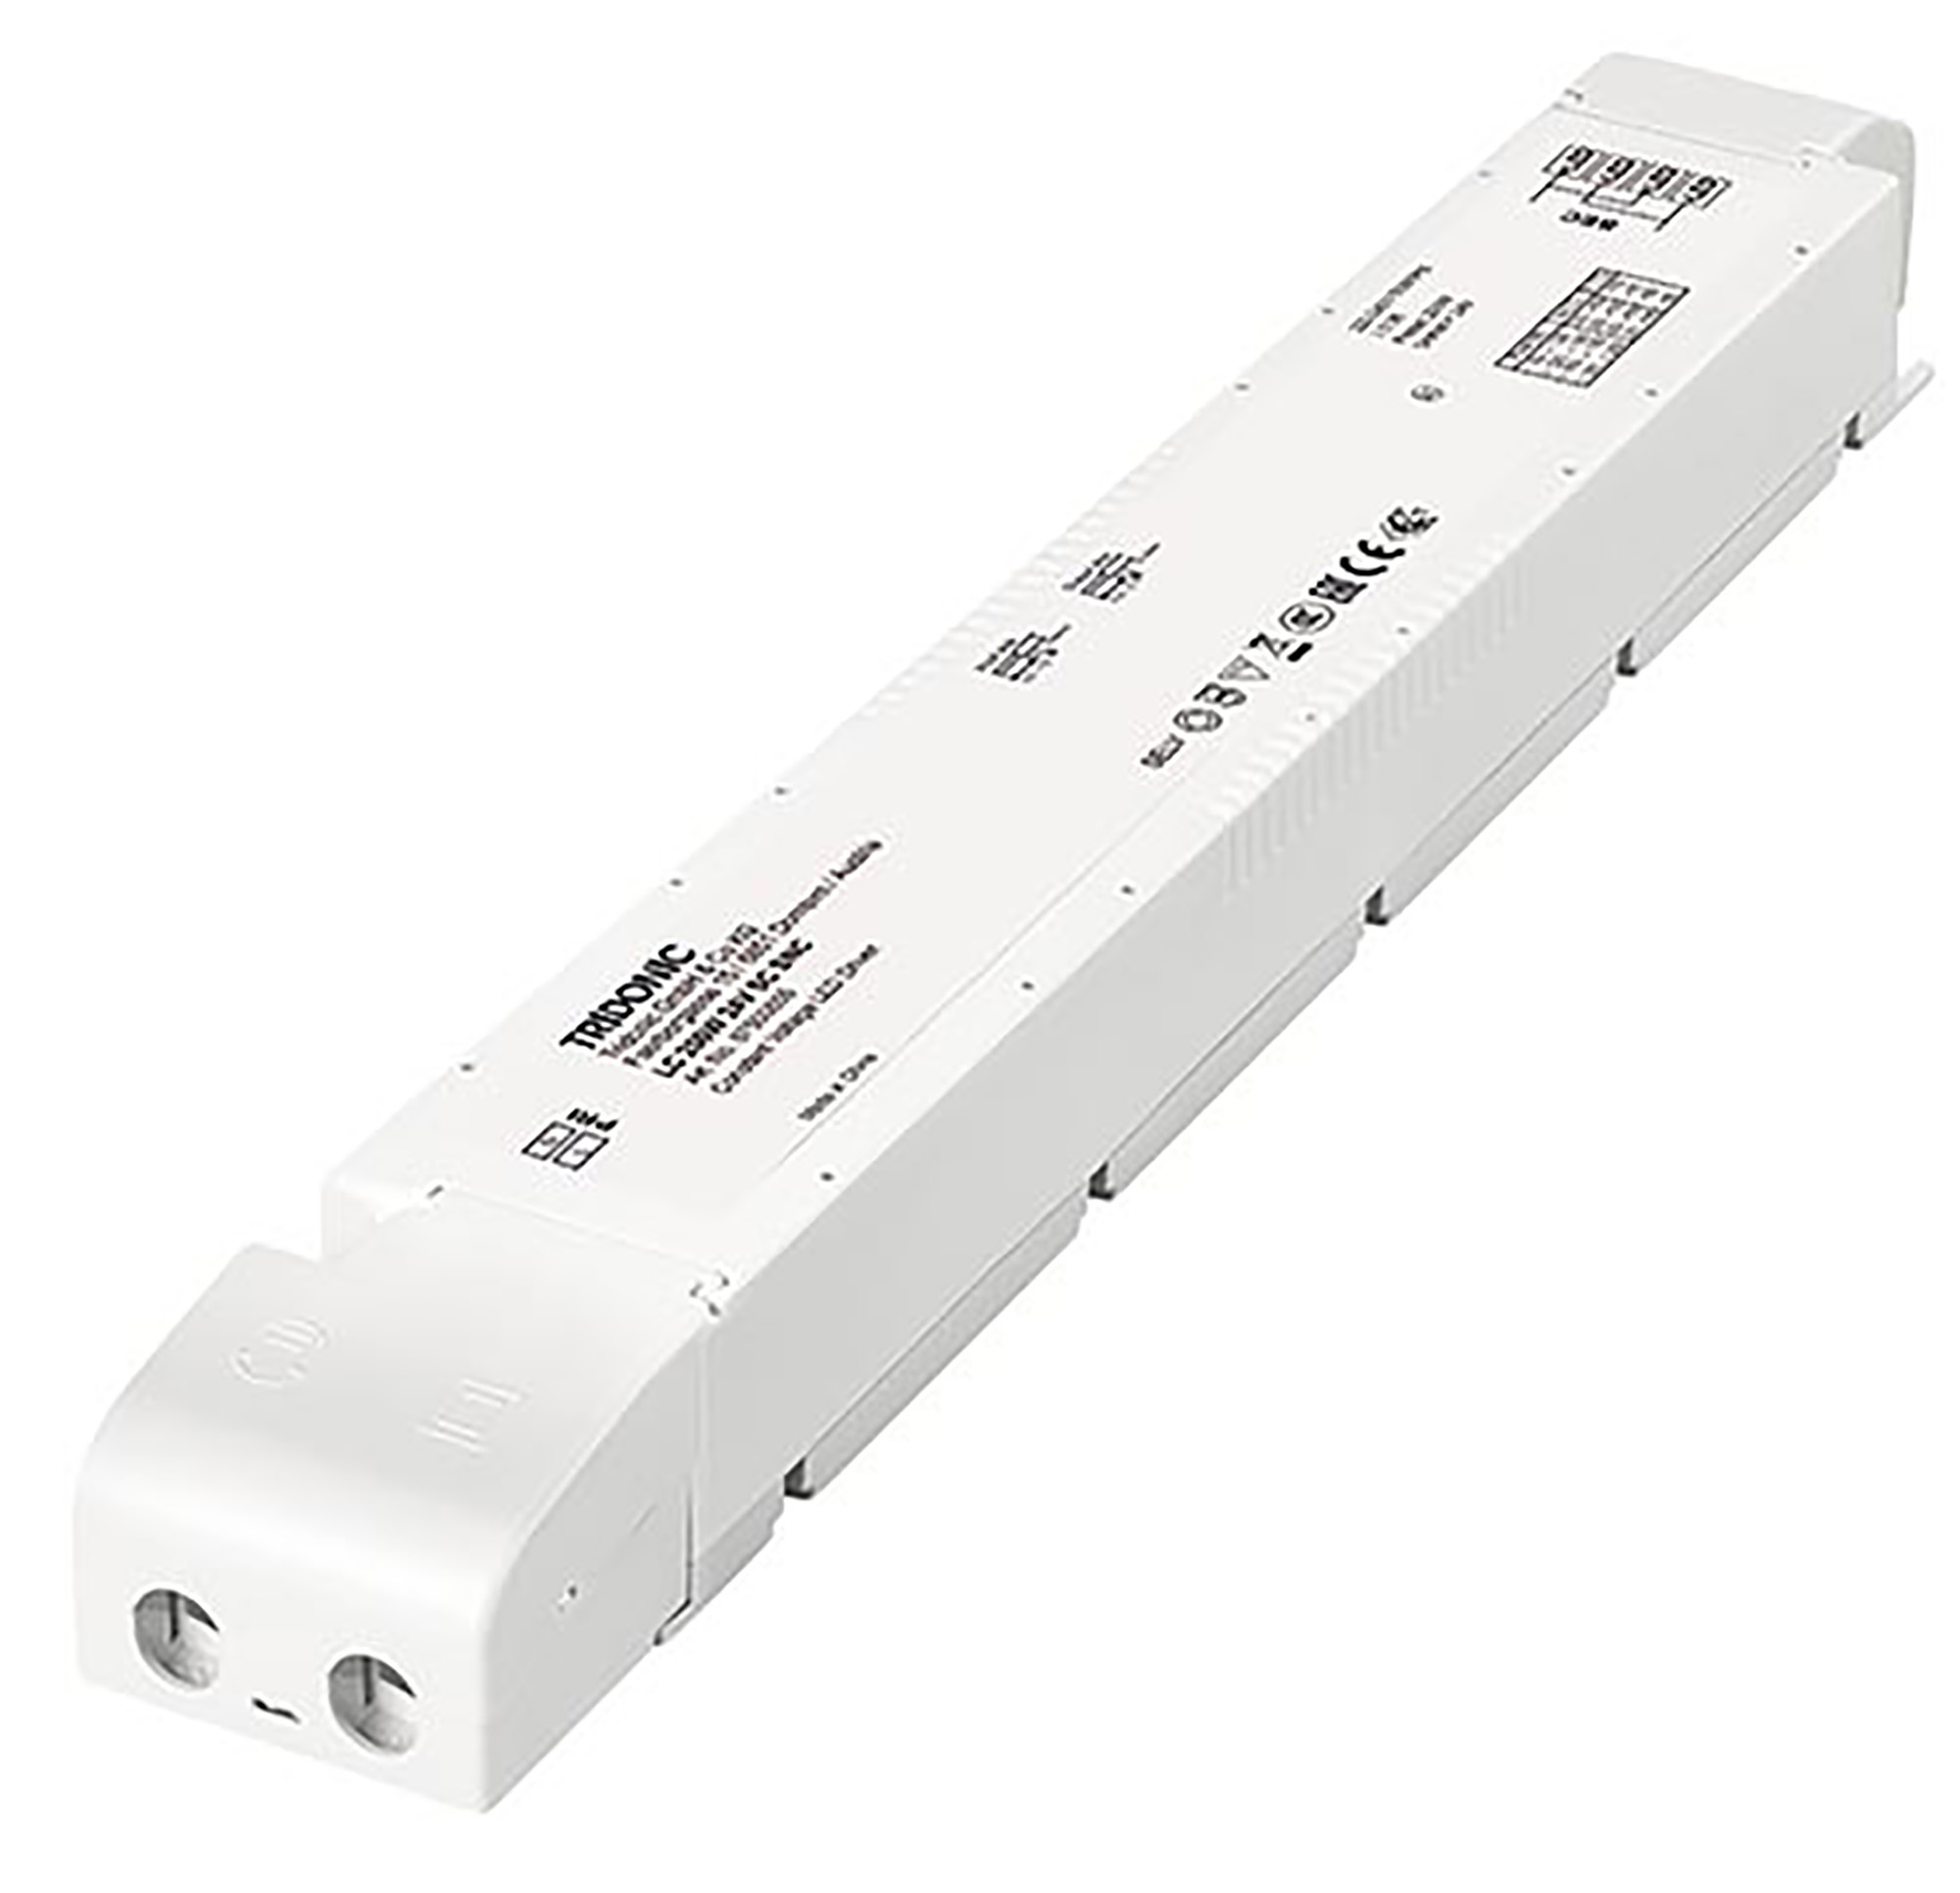 87500855  Tridonic, LC 200W 24V SC SNC SP, LED Driver Indoor Constant Voltage ESSENCE, Made In PRC, 5yrs Warranty